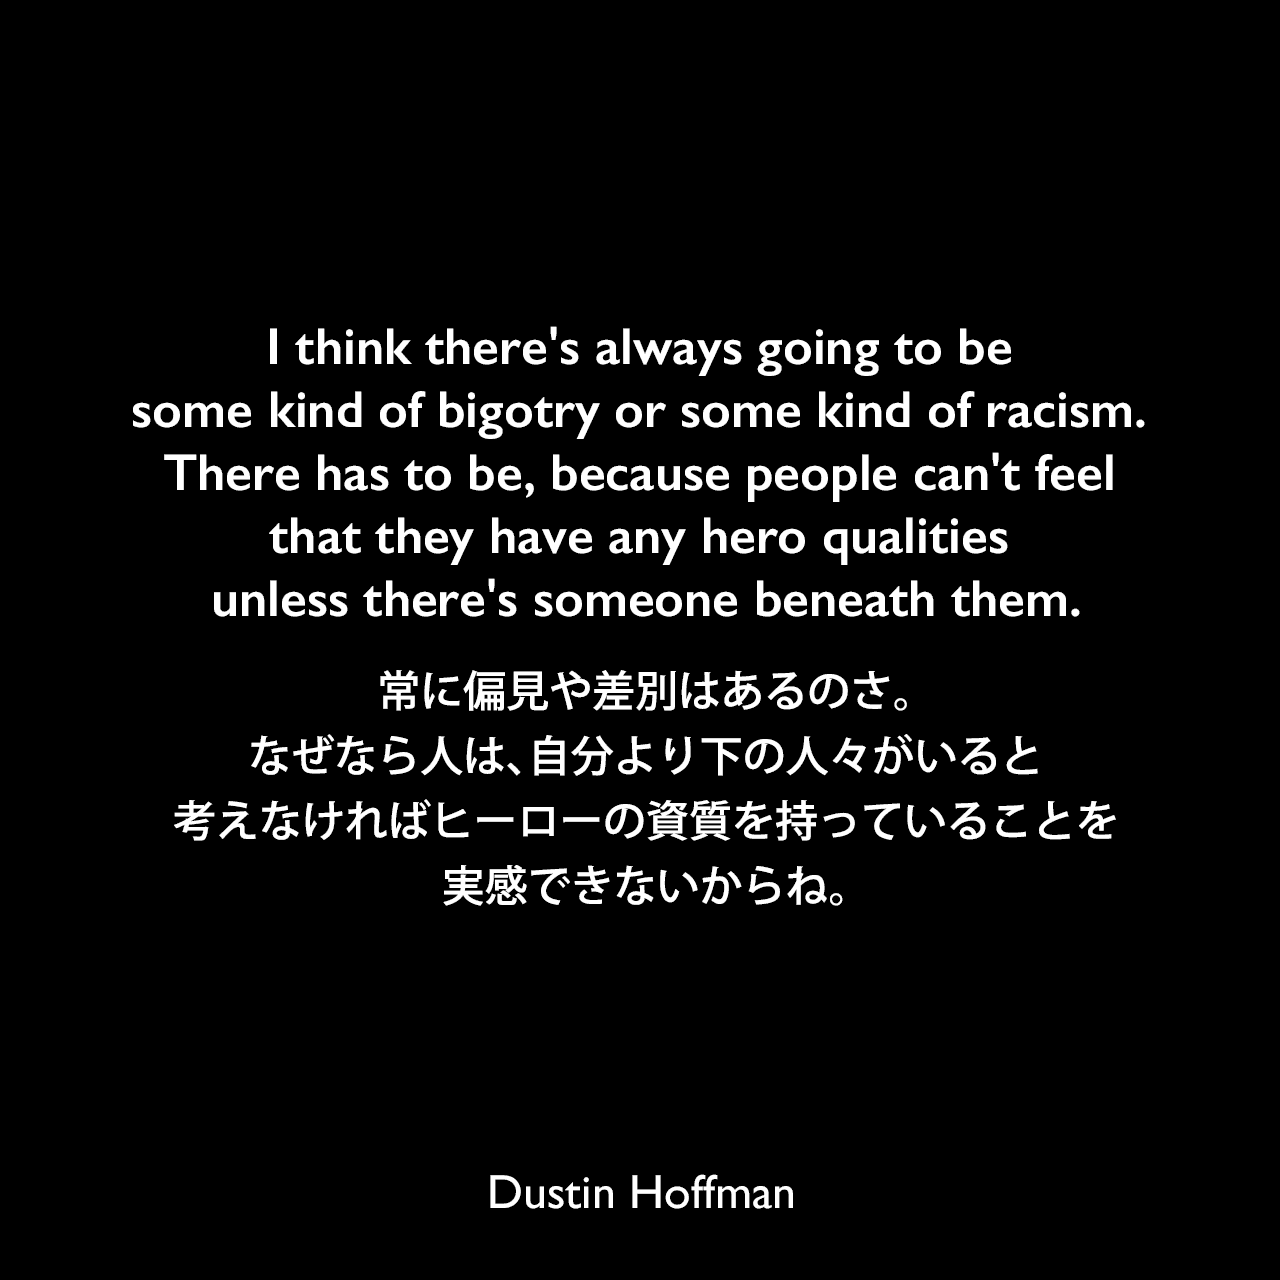 I think there's always going to be some kind of bigotry or some kind of racism. There has to be, because people can't feel that they have any hero qualities unless there's someone beneath them.常に偏見や差別はあるのさ。なぜなら人は、自分より下の人々がいると考えなければヒーローの資質を持っていることを実感できないからね。Dustin Hoffman